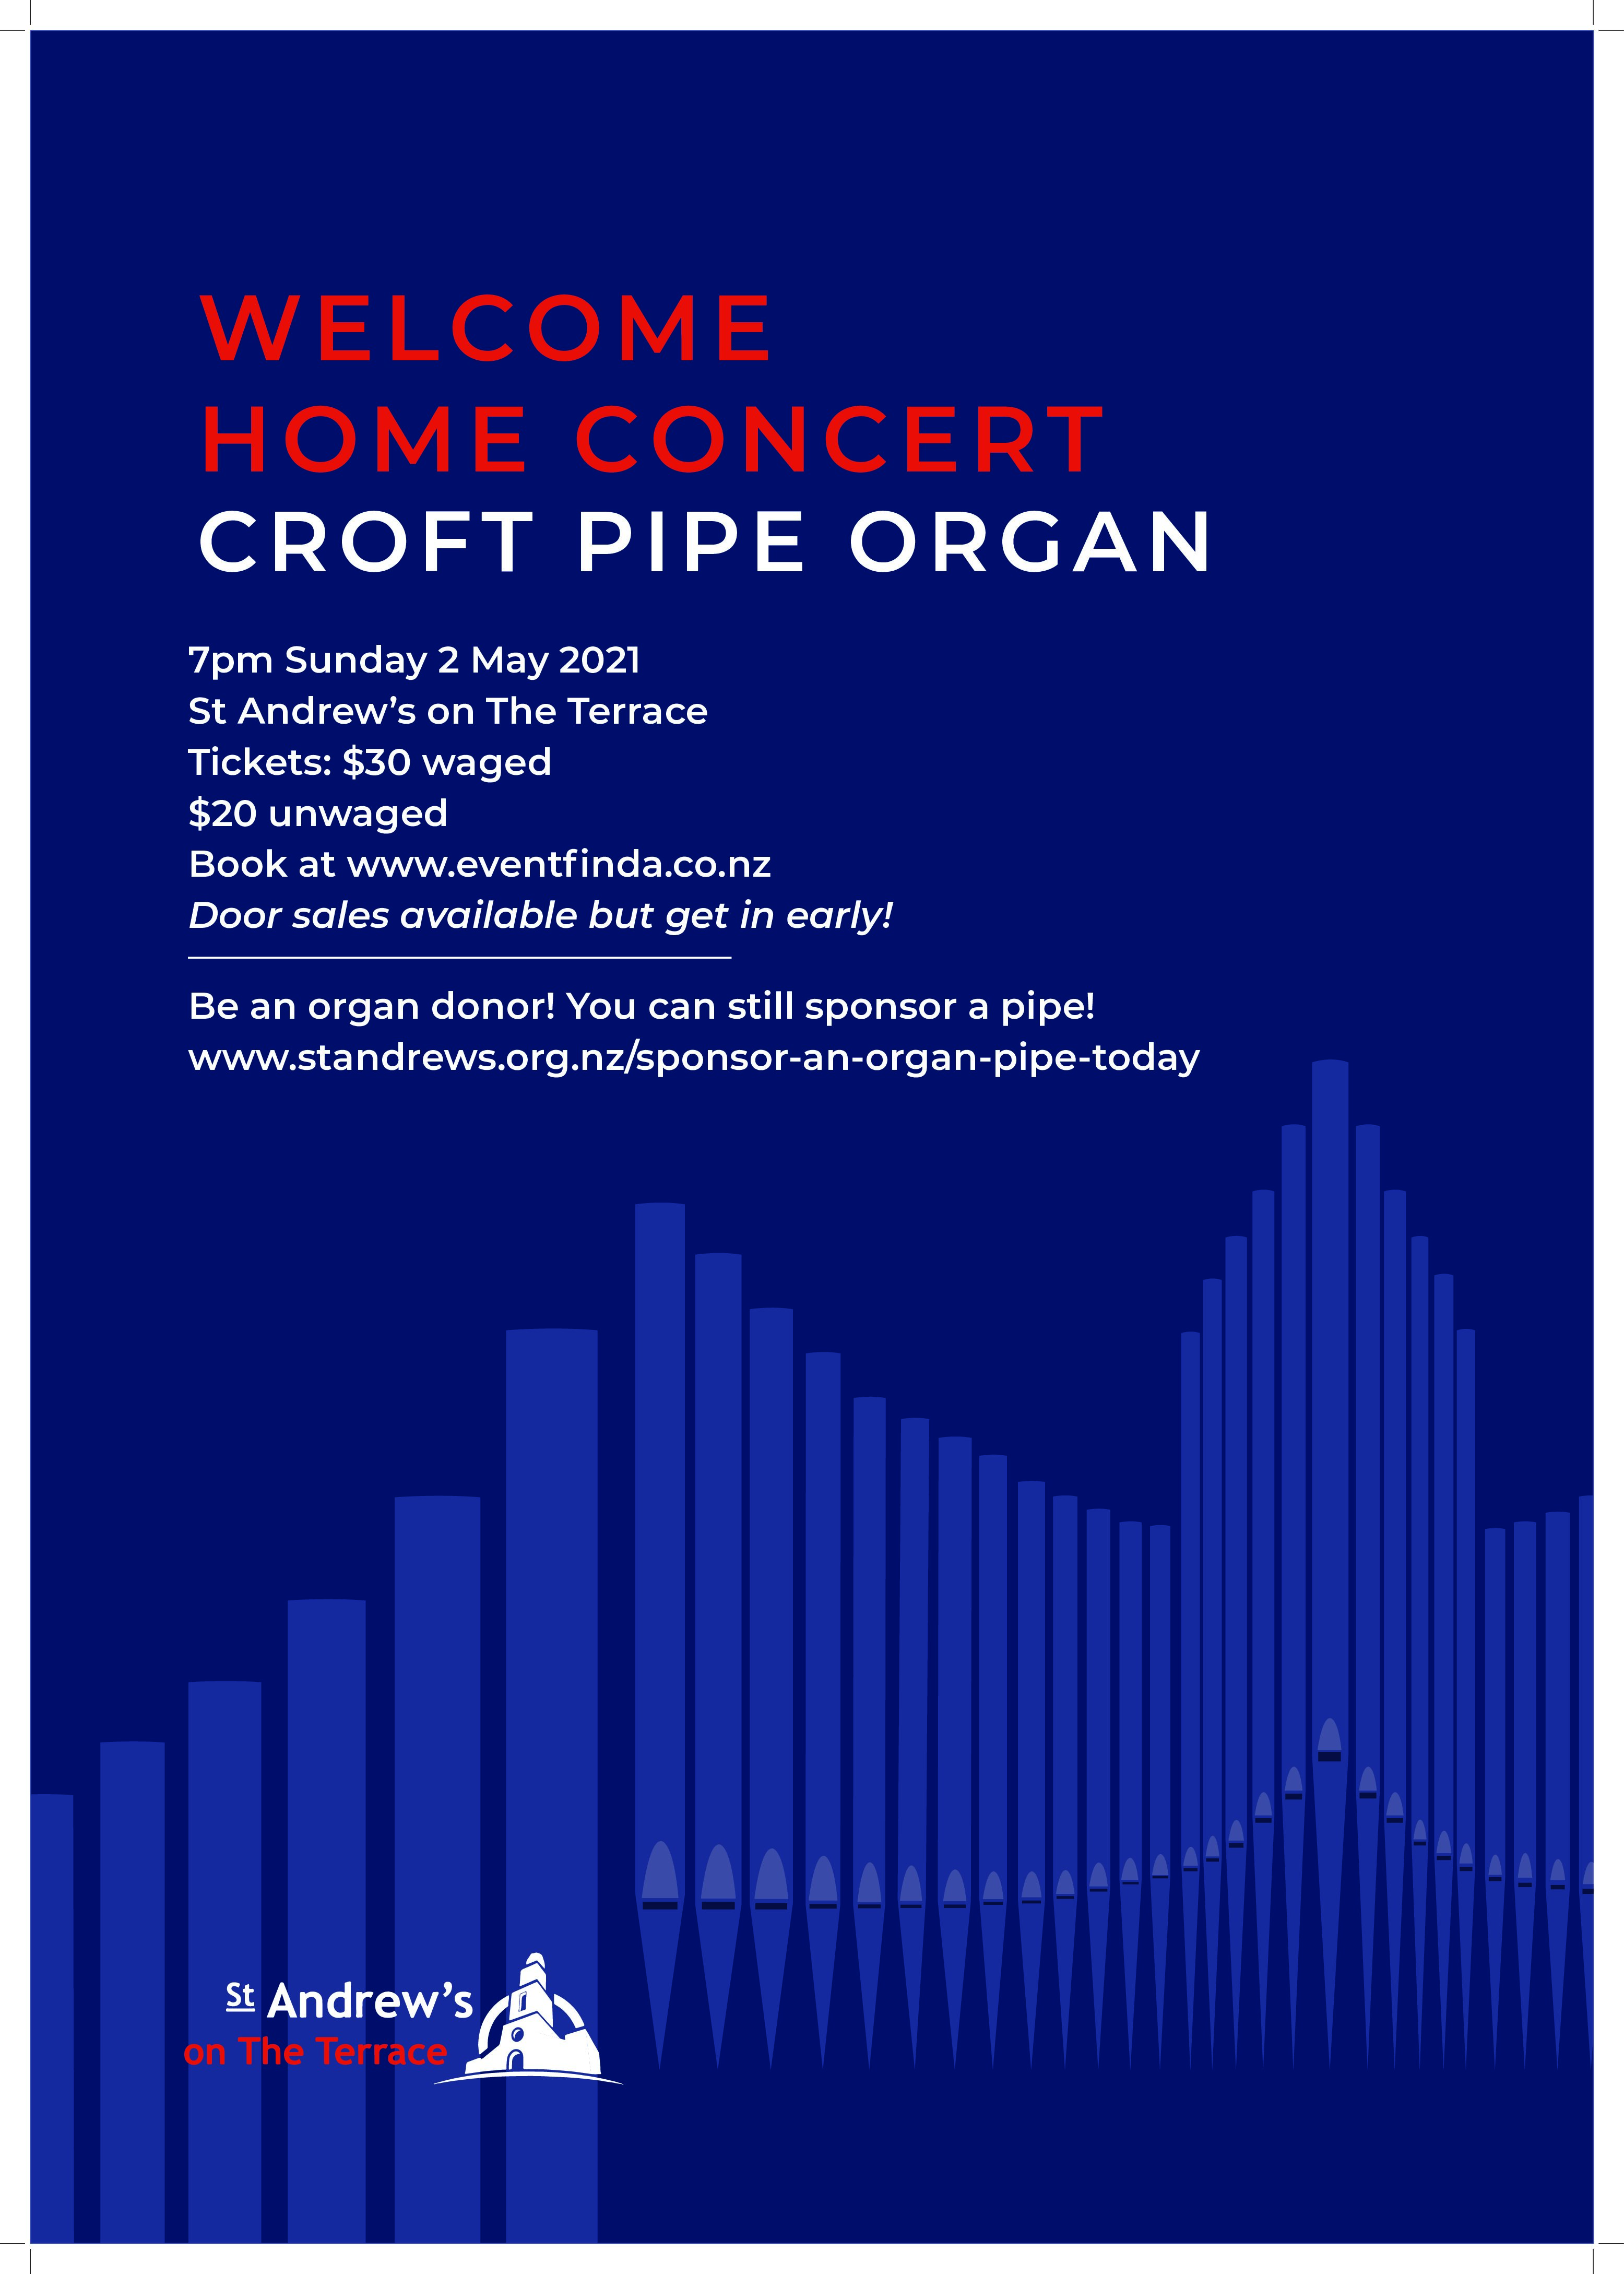 Welcome Home Concert – Croft Pipe Organ